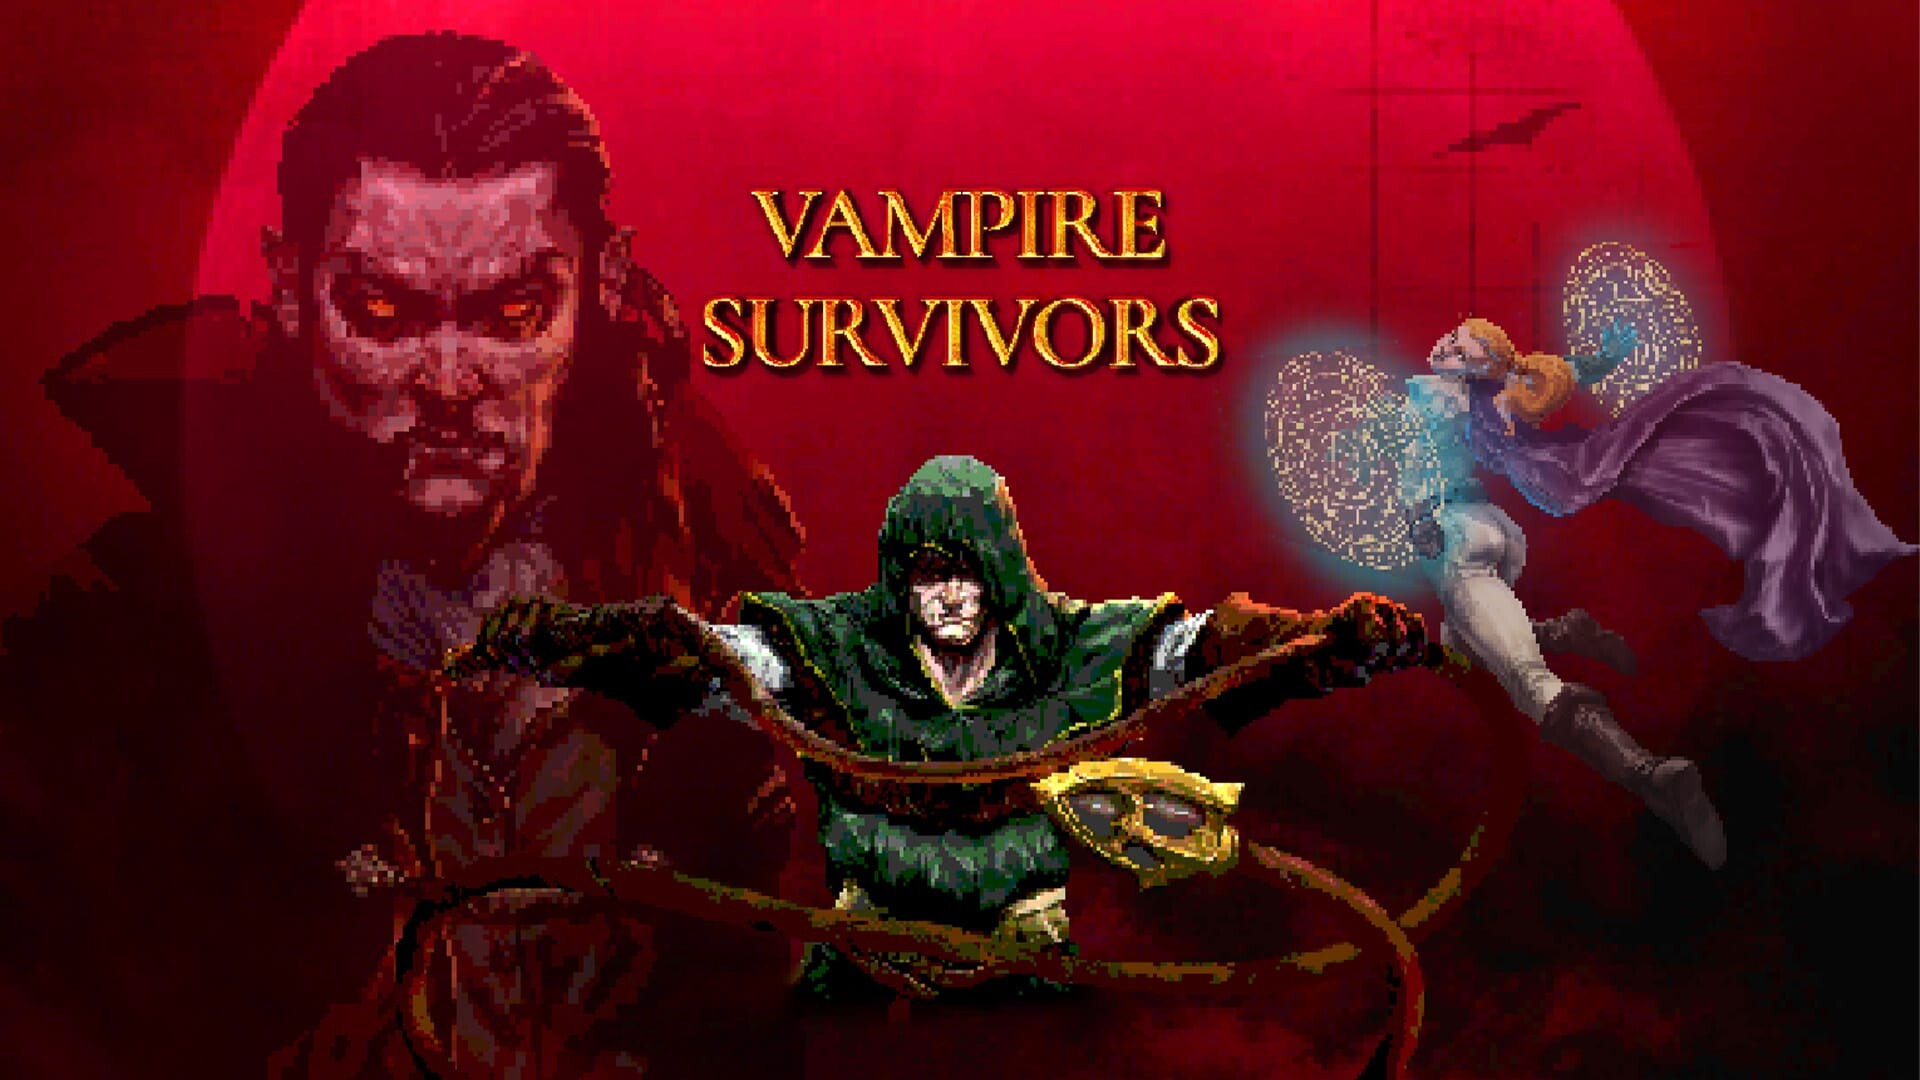 Vampire Survivors' is getting four-player couch co-op